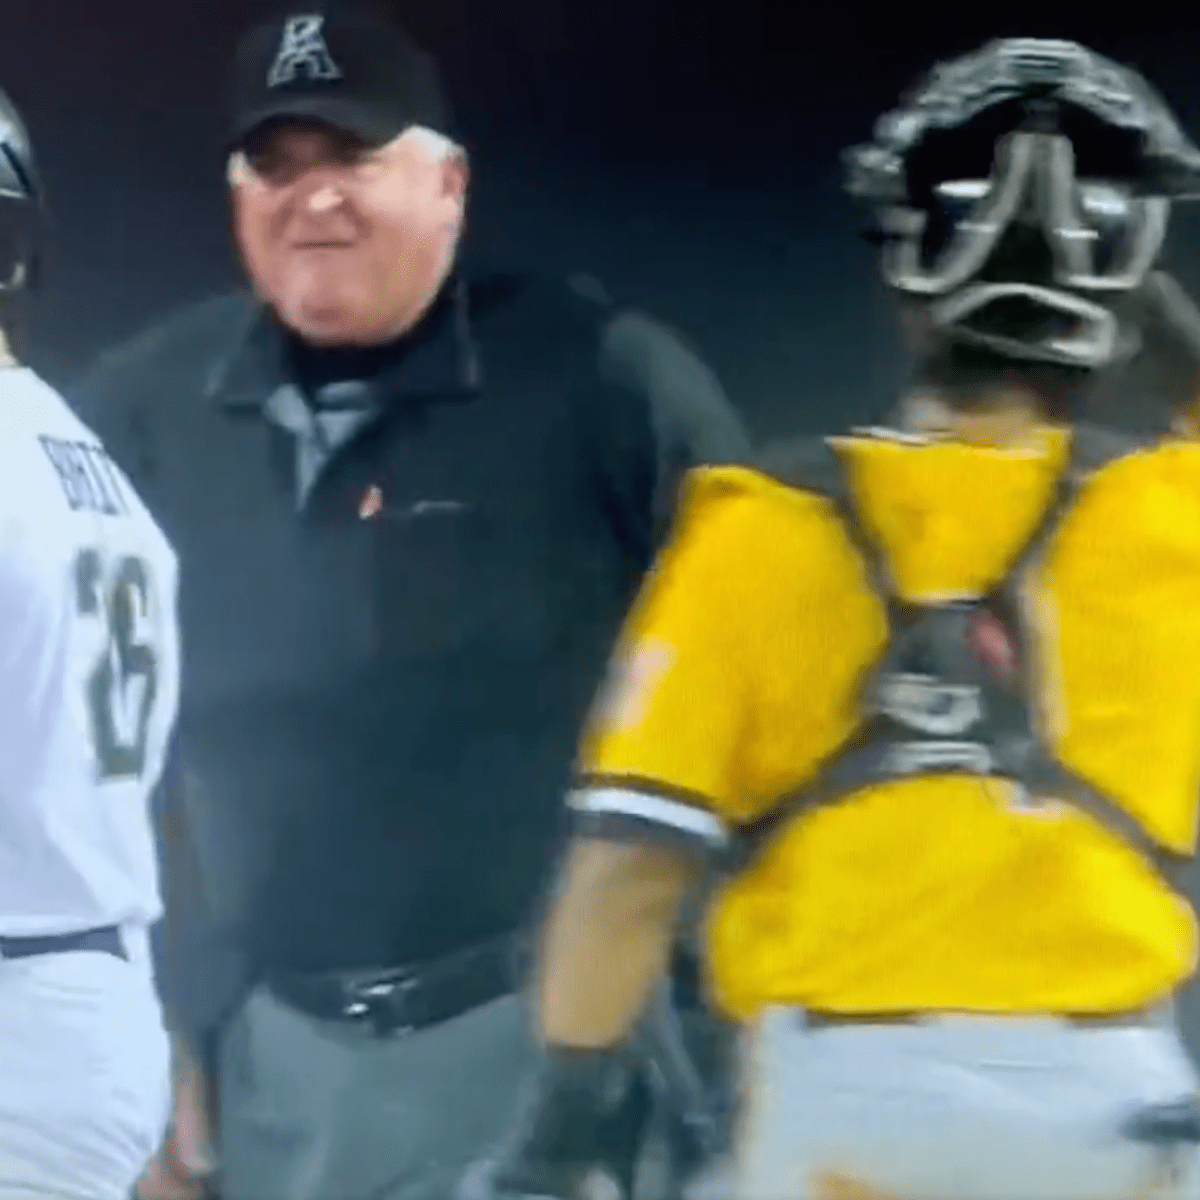 There's nothing more relatable than this MLB umpire cursing on a hot mic, This is the Loop